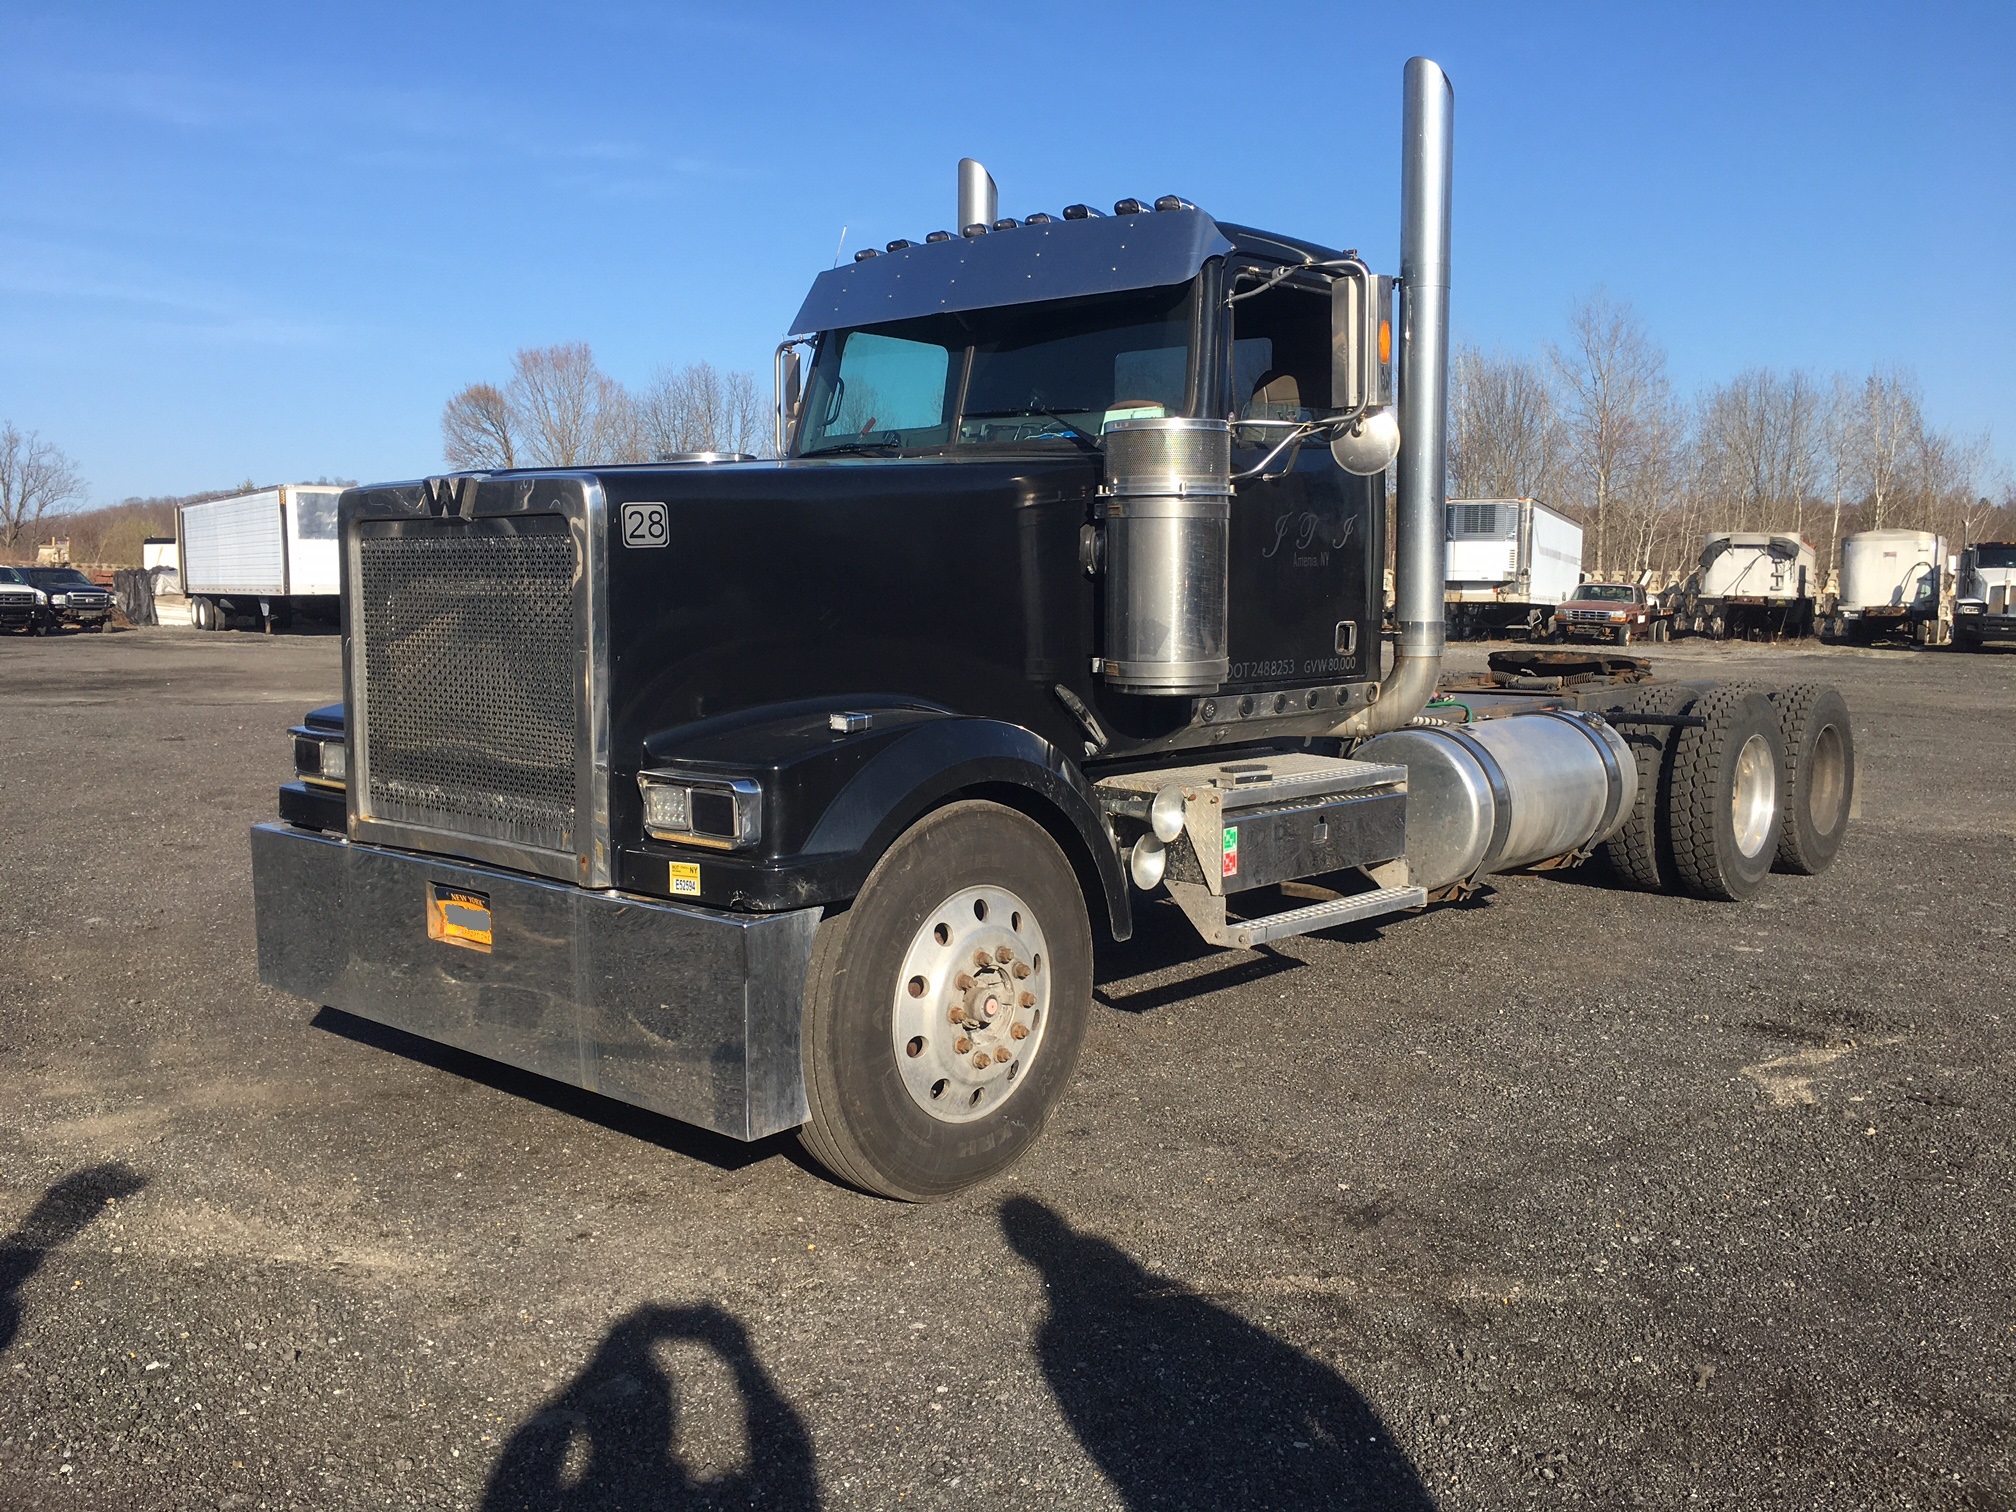 Western Star Semi Truck. 2000 year model tractor with a Caterpillar C15 475 horse power motor and a 13 speed Eaton Fuller transmission. It has a bit over 500 K miles. There is a three stage engine break, Air ride driver seat, heat, AC, and power windows.